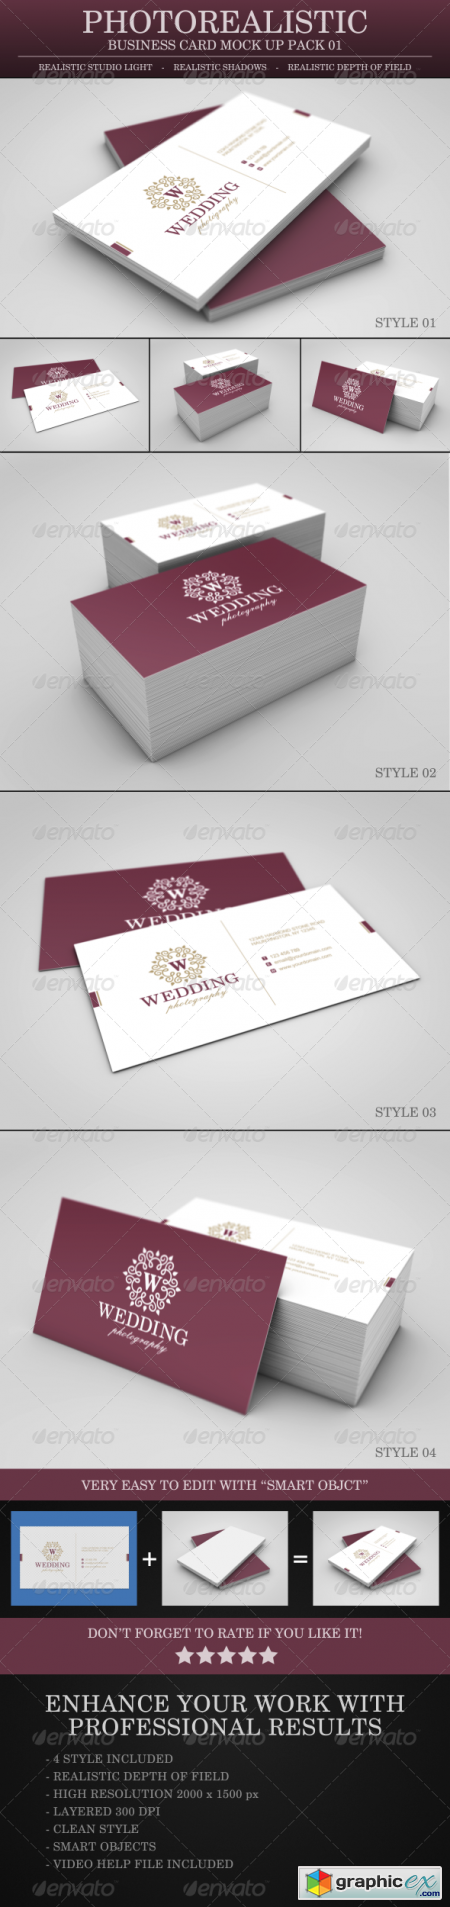 Photo Realistic Business Card Mock Up Pack - 01 3742572